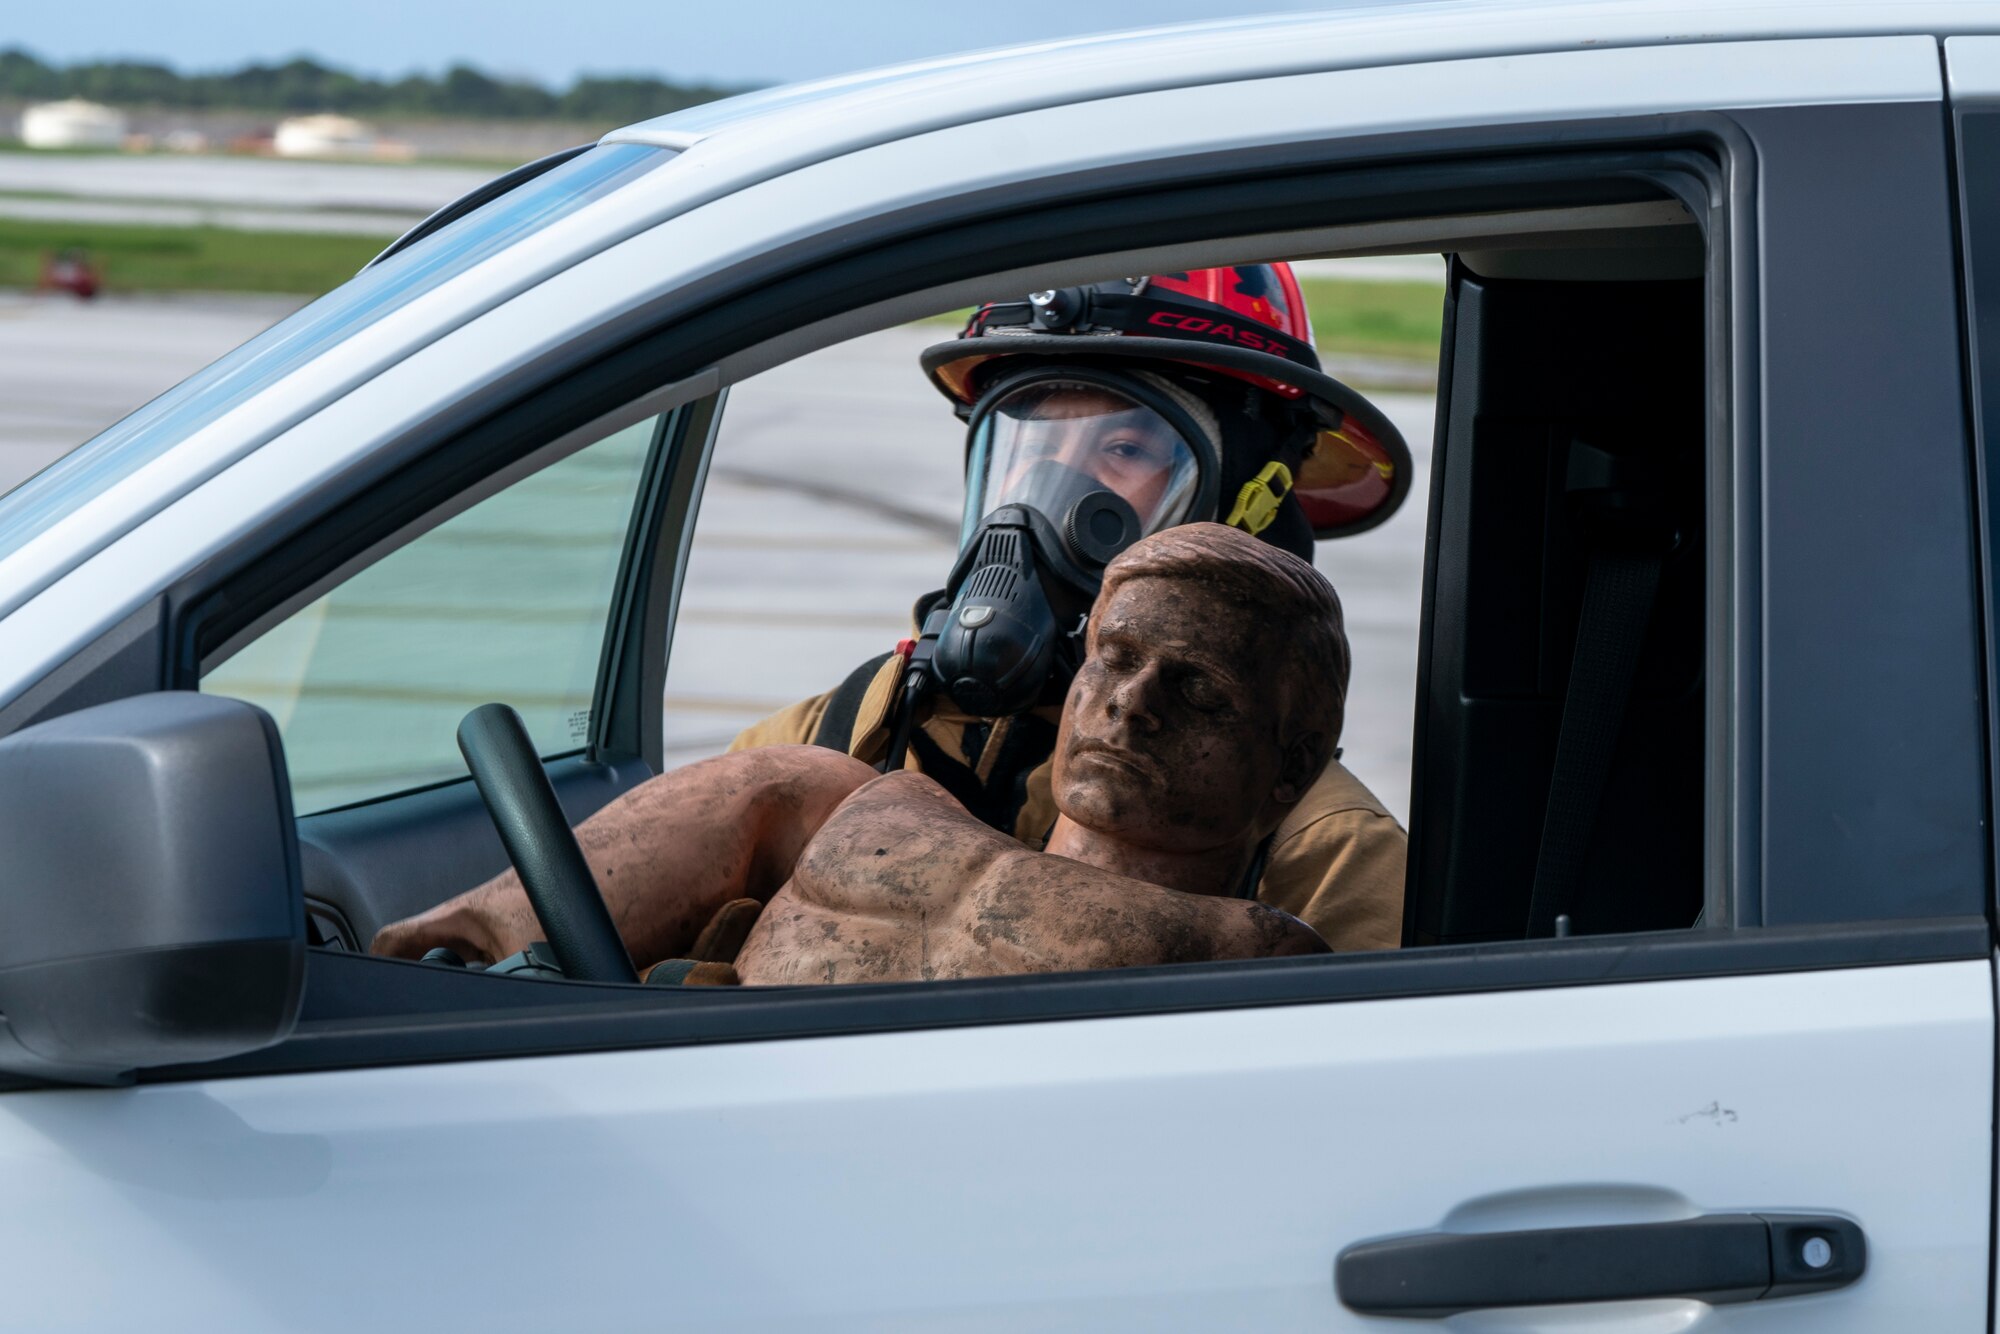 Air Force Staff Sgt. Mykah Rosa, 36th Civil Engineering Squadron crew chief, pulls a mannequin from a simulated burning vehicle during Exercise Sling Stone 21-1 on Nov. 5, 2020 at Andersen Air Force Base, Guam. Exercise Sling Stone is an annual anti-terrorism force protection exercise. The exercise involved multiple training scenarios intended to prepare service members to respond to emergency situations. (U.S. Air Force photo by Tech. Sgt. Esteban Esquivel)